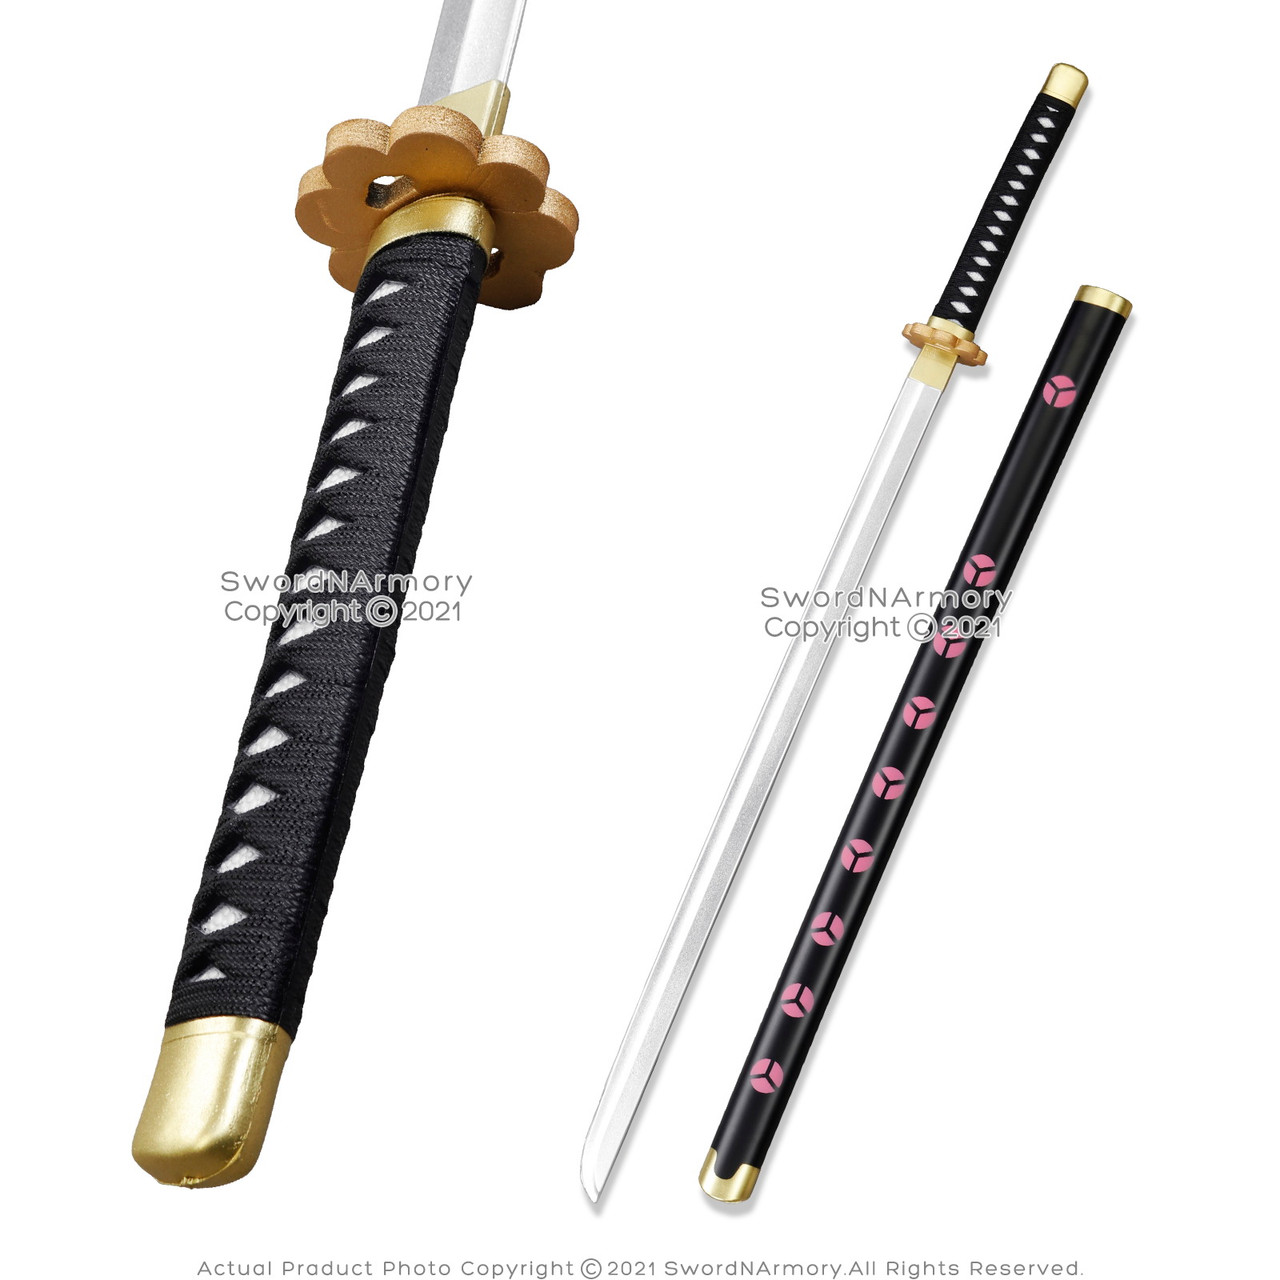 Image of an anime character in a black and gold outfit with a katana